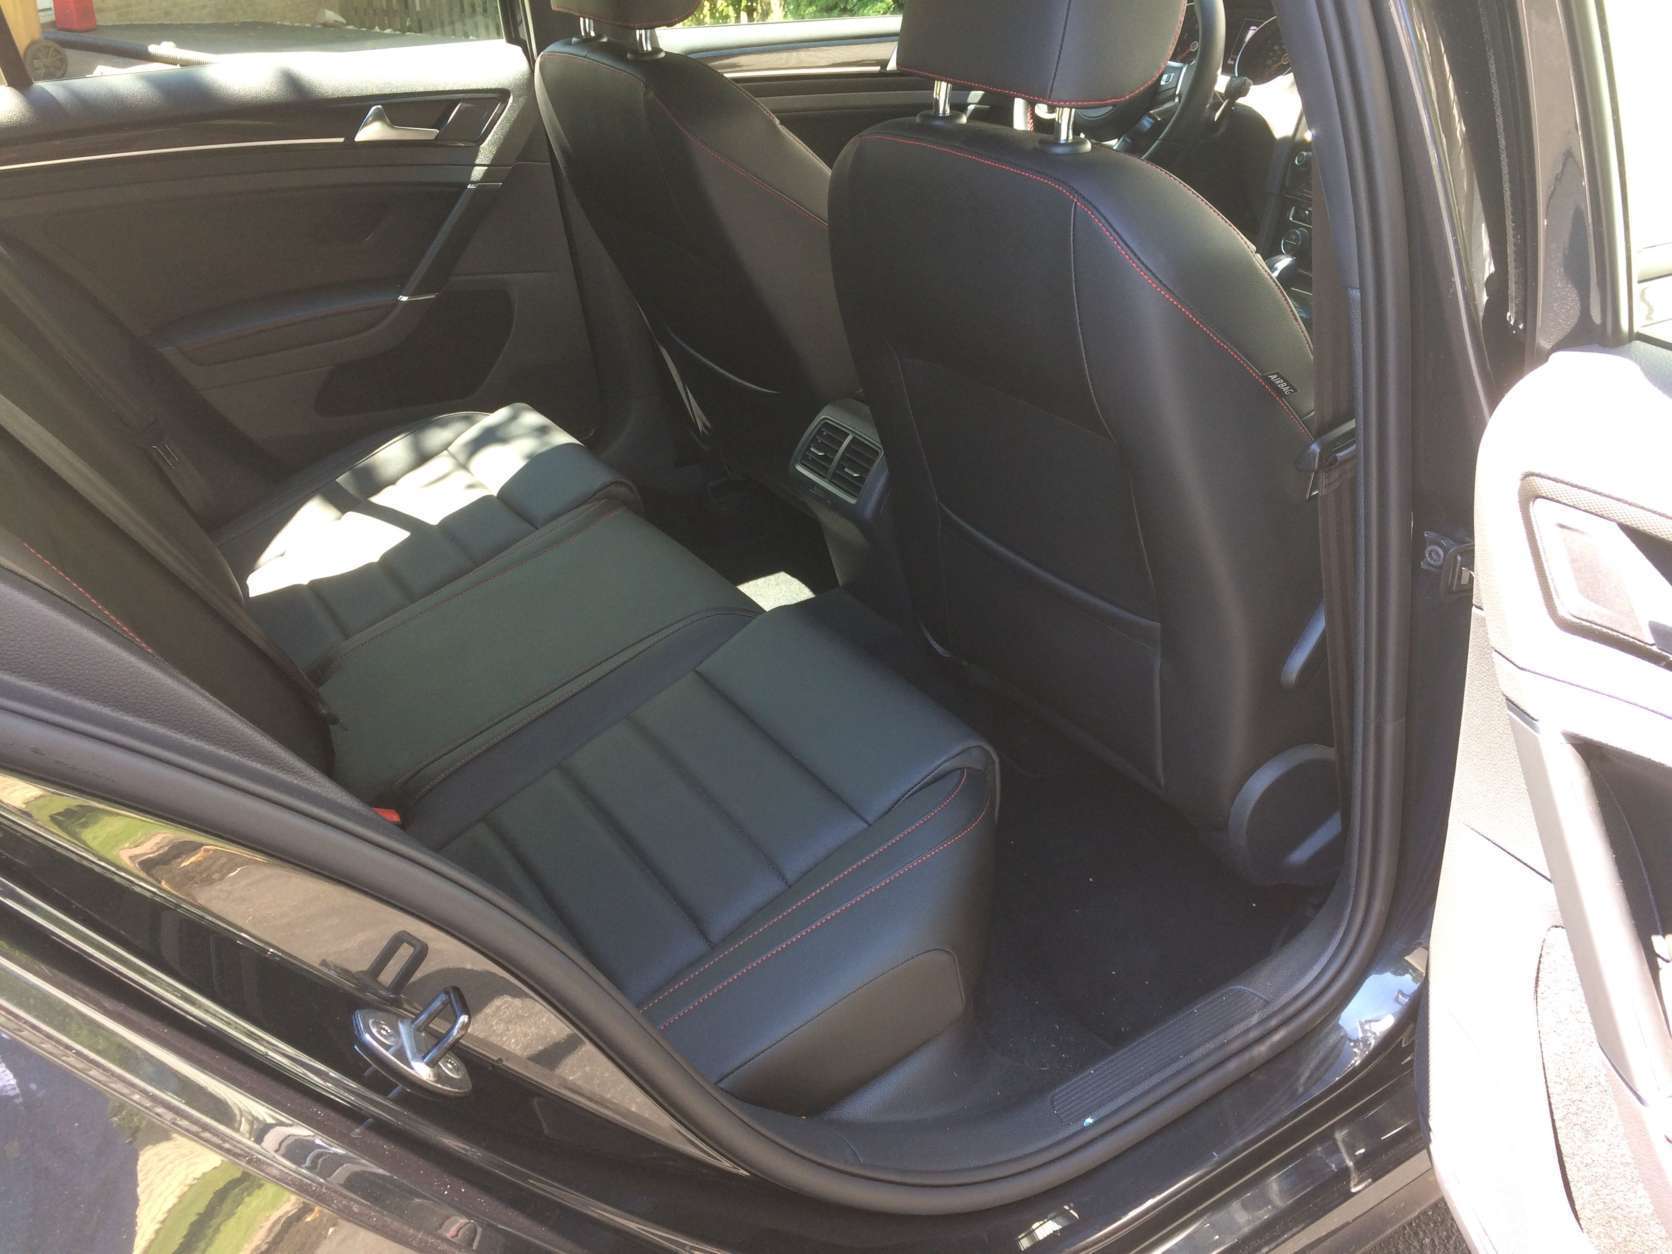 Inside is a hit for this hot hatch, with great space for a car this size. Rear seat riders have a good amount of space for this compact hatch with ample headroom and usable leg room for most. (WTOP/Mike Parris) 